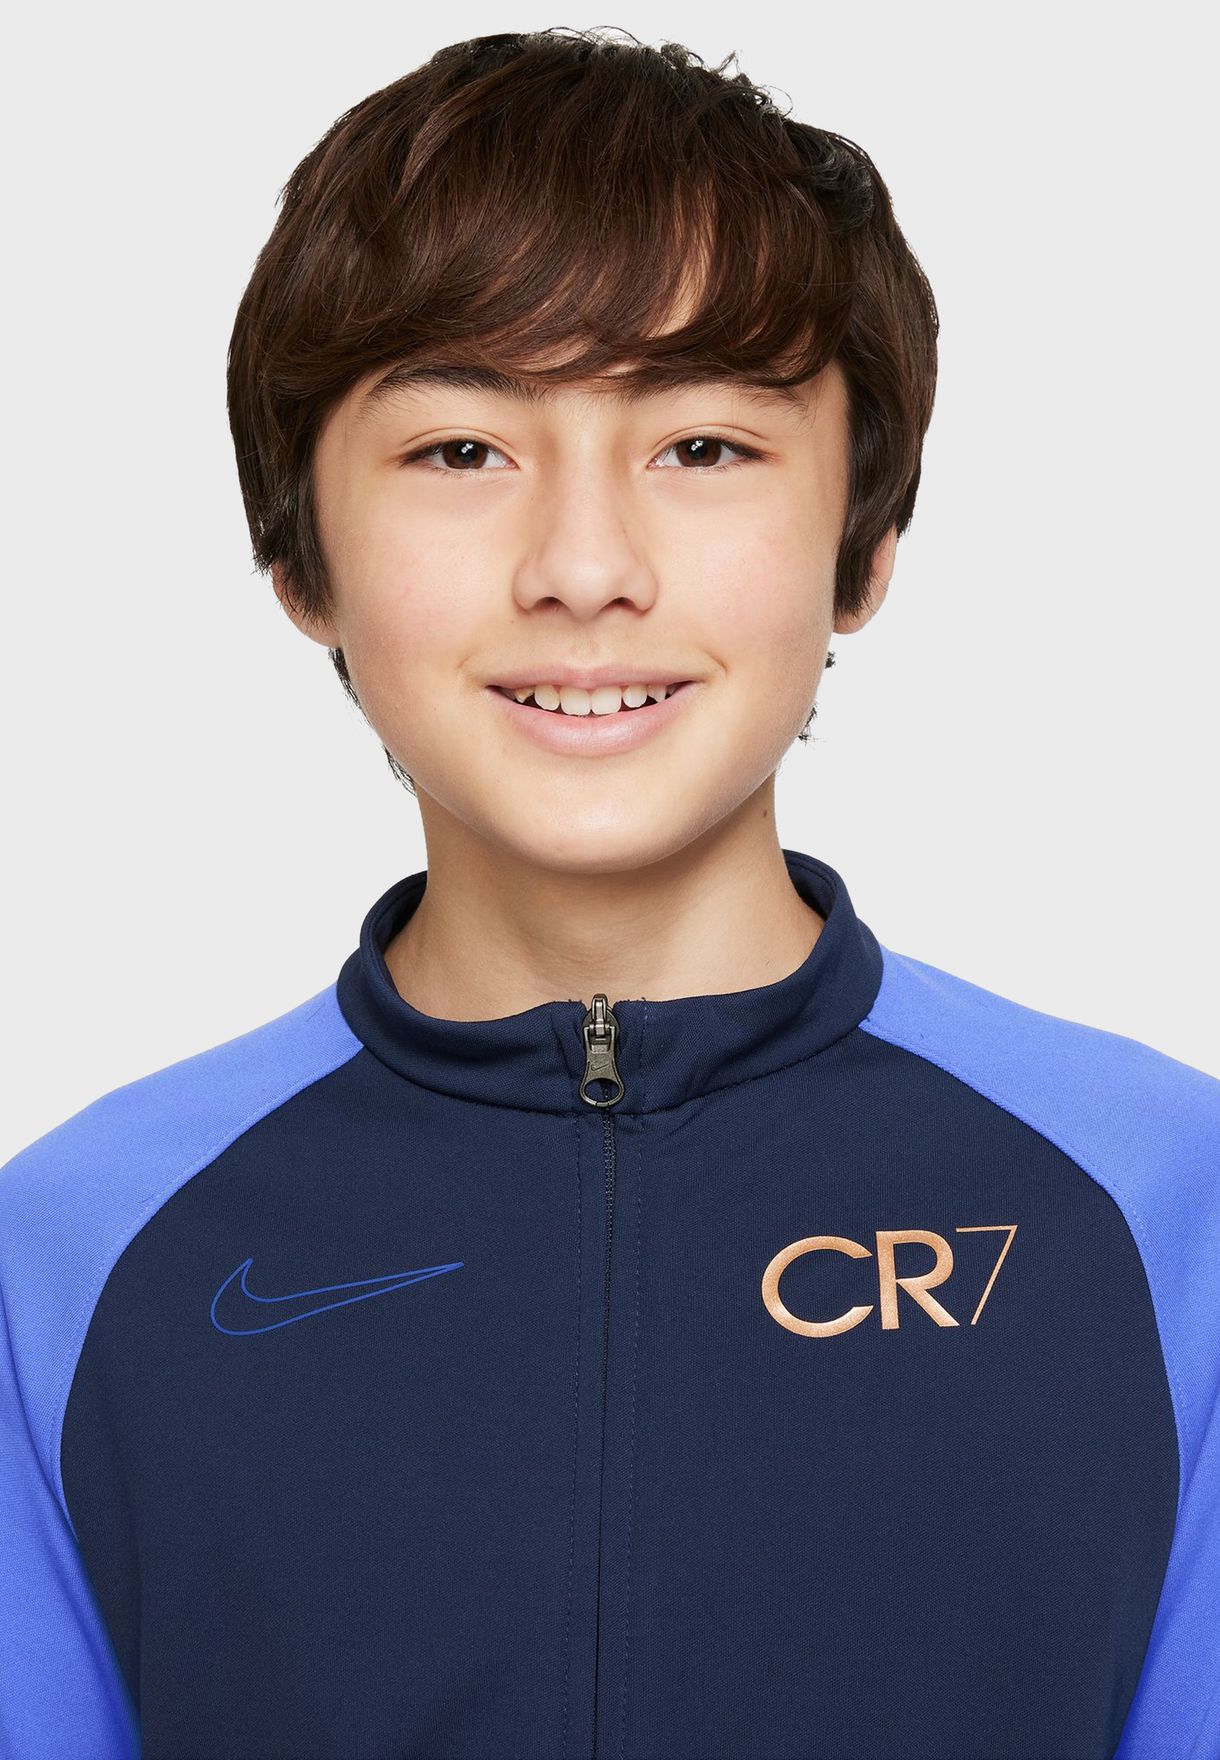 Youth Cr7 Tracksuit